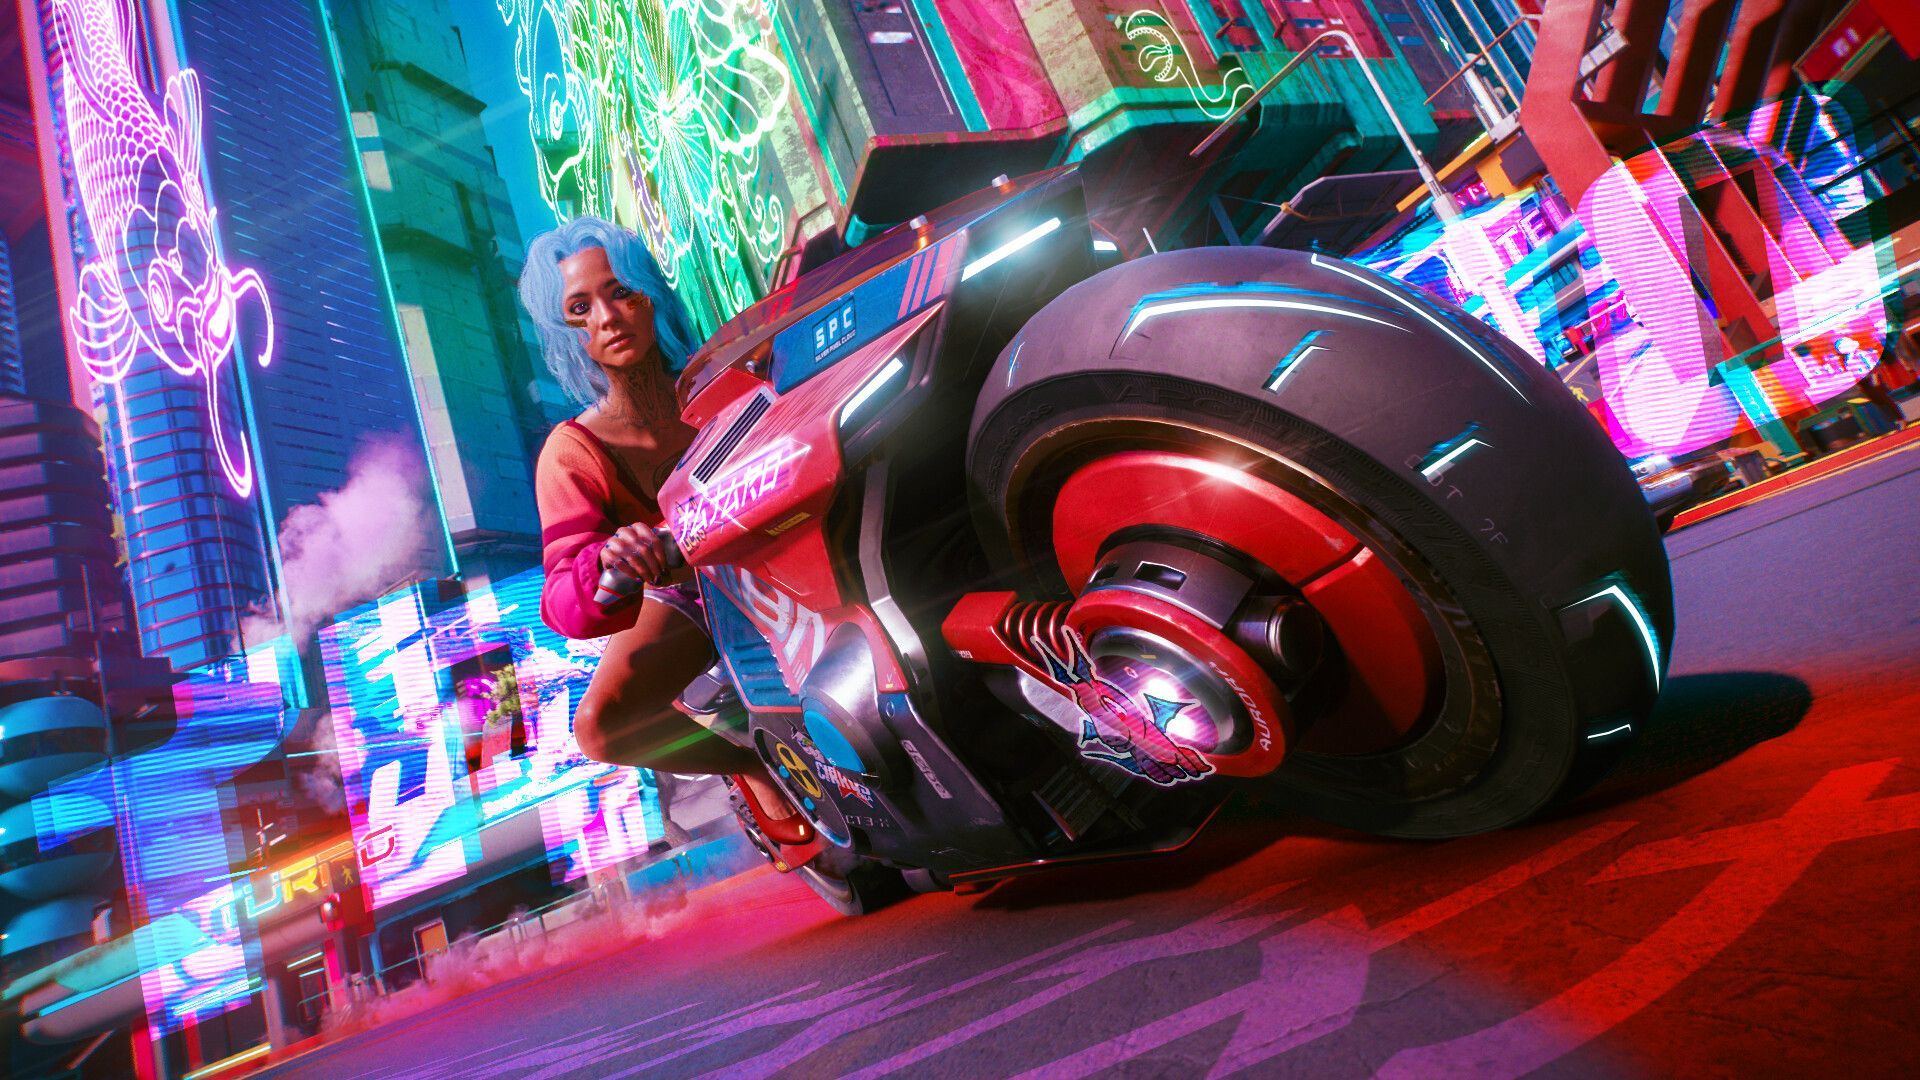 Cyberpunk 2077's release date has been pushed back to September 17th - Cyberpunk 2077